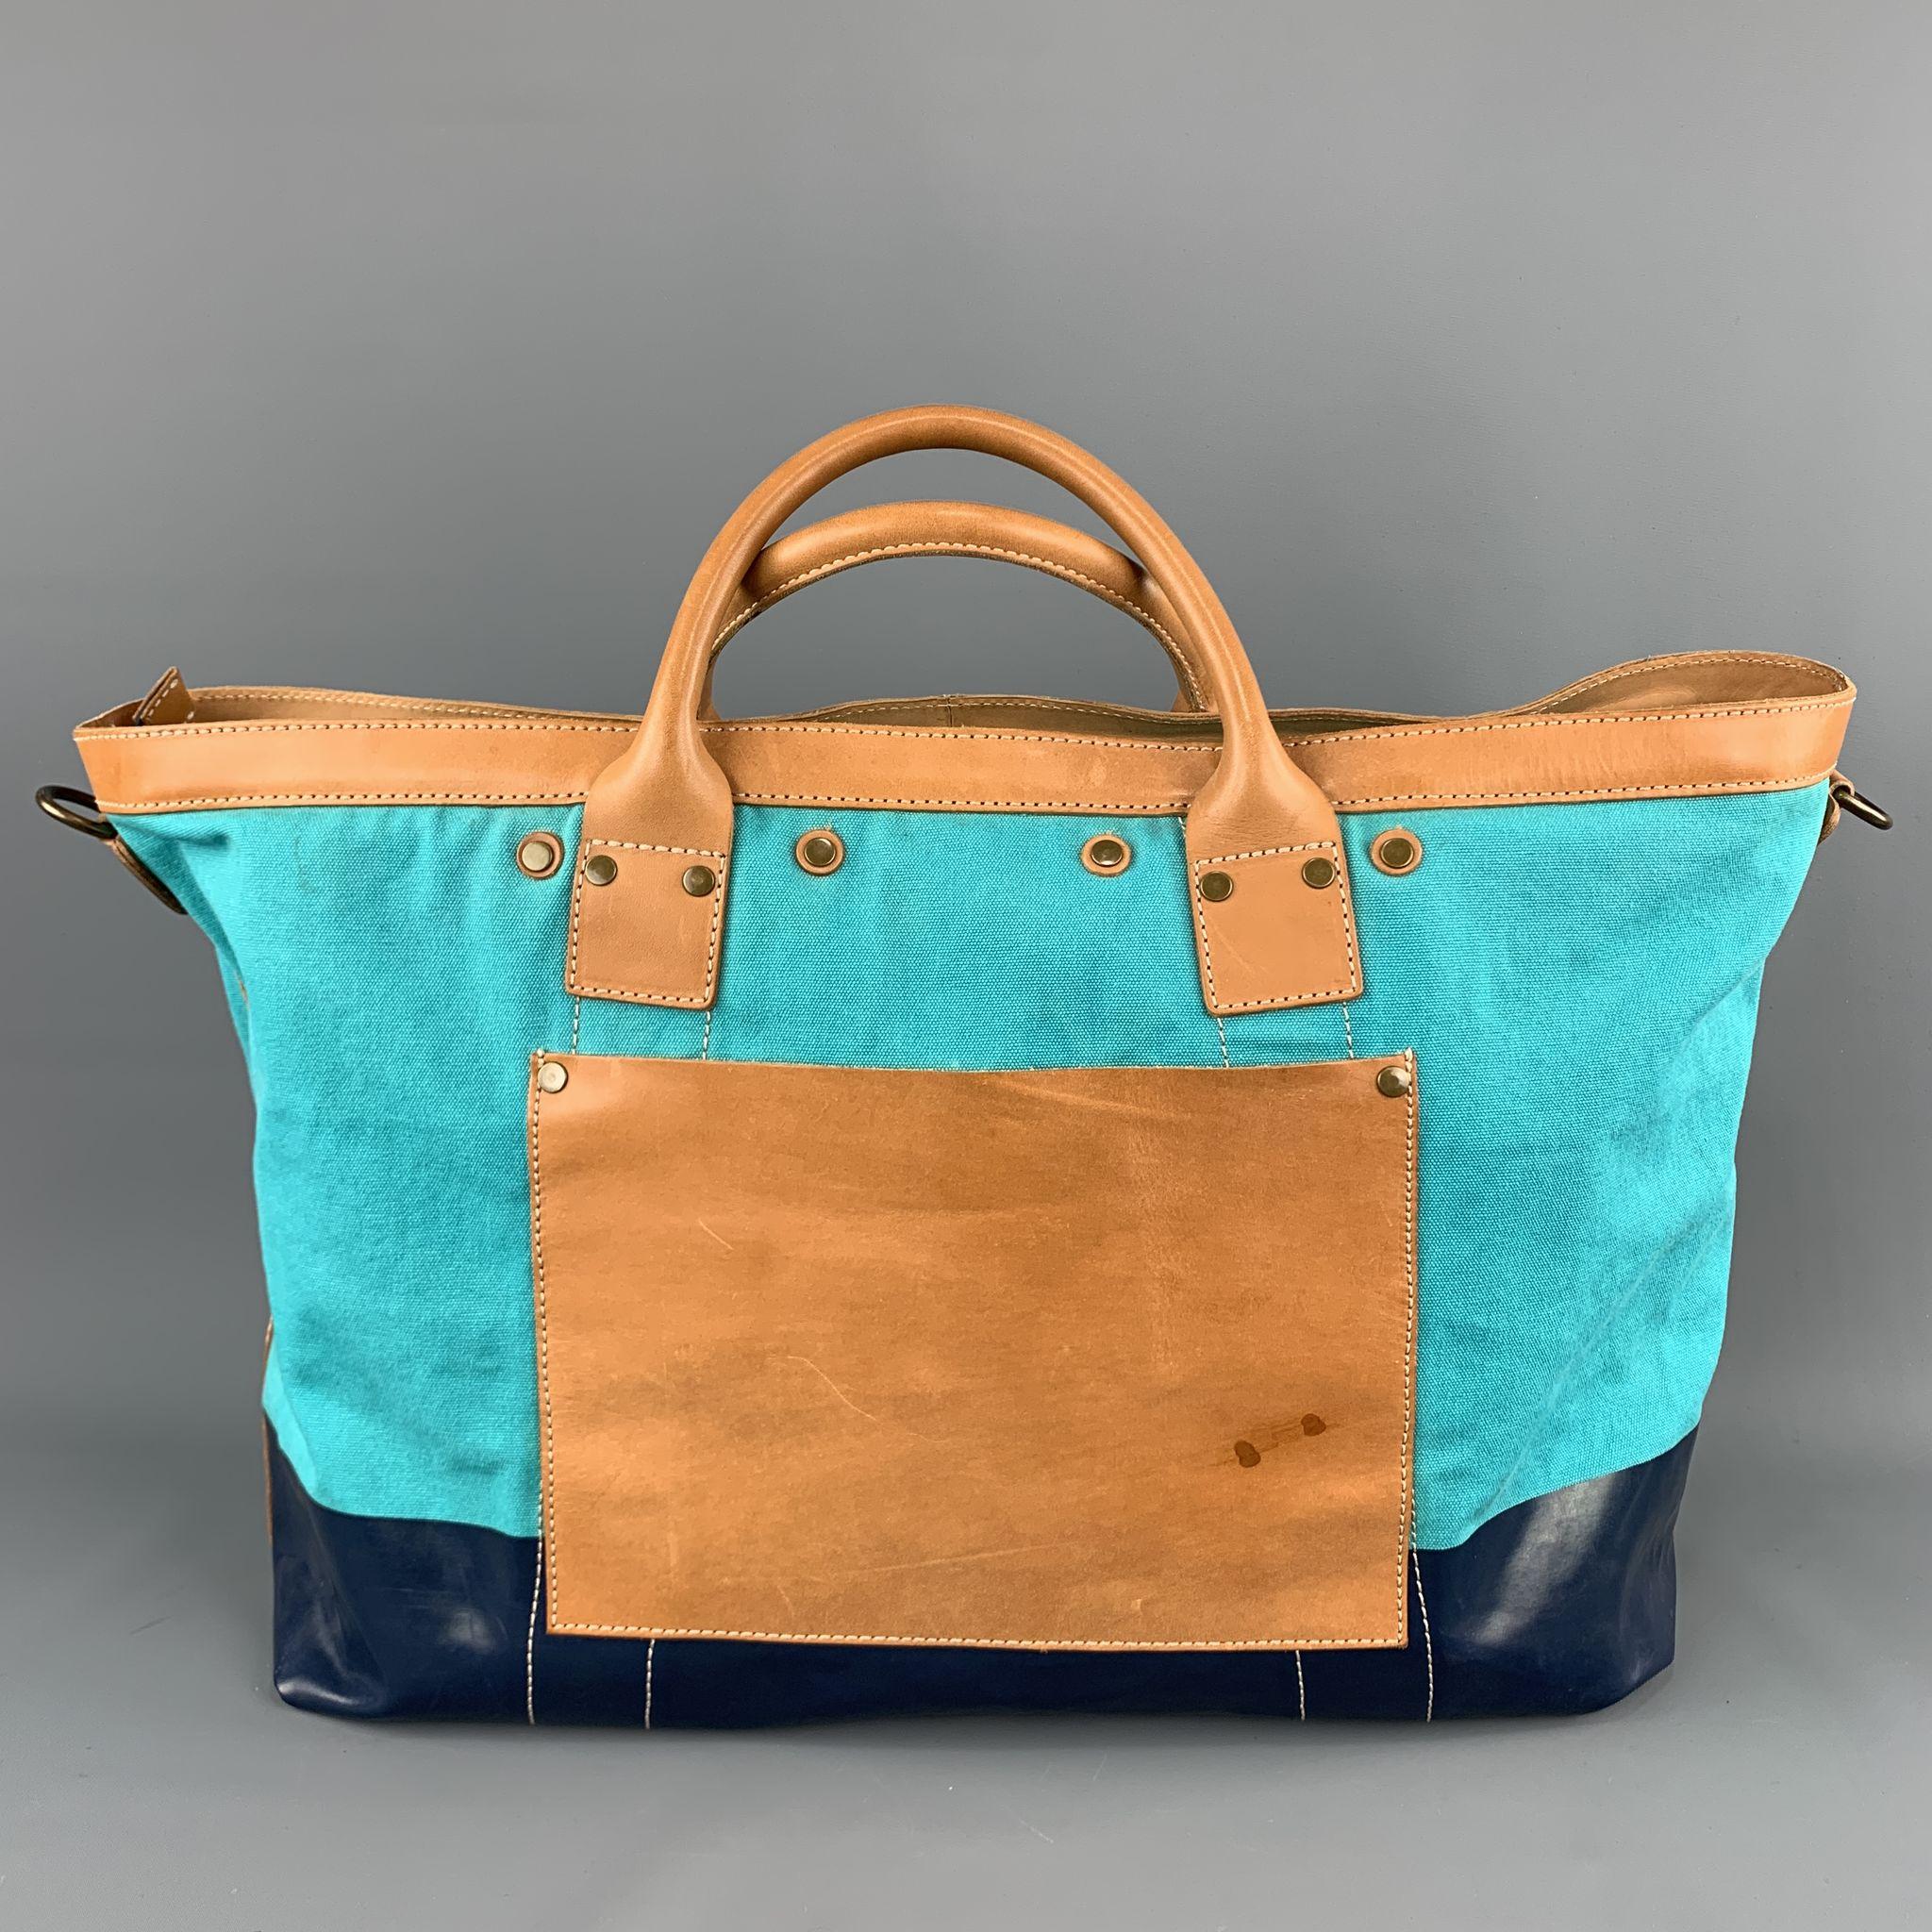 COLE HAAN Tote Bag comes in aqua and navy tones in two tones of a canvas material, rectangular, with a leather trim, gold tone metal zipper and hardware, a leather patch pocket outside and inner pockets. Minor wear.

Very Good Pre-Owned